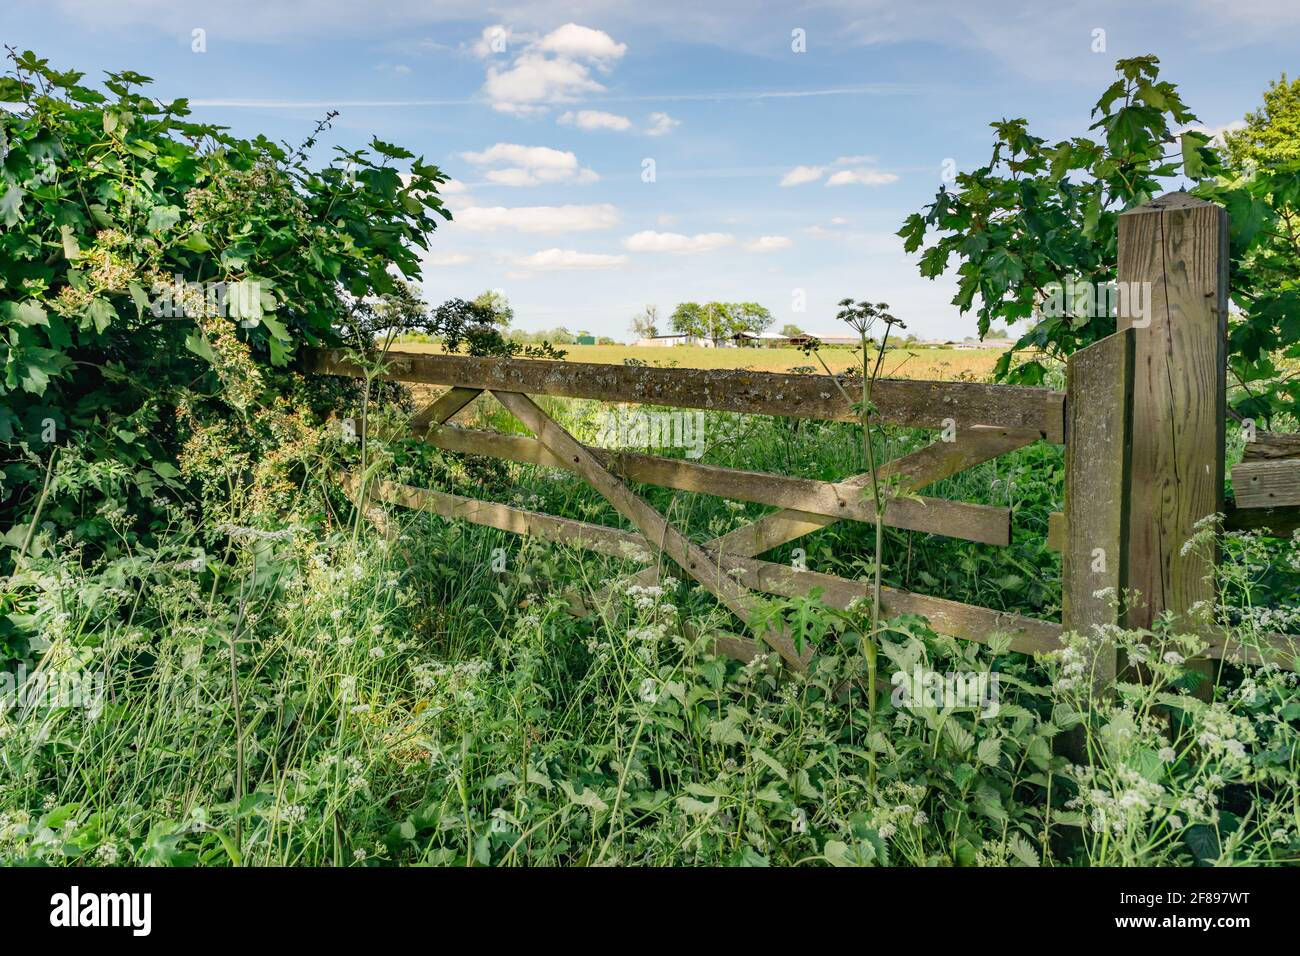 Crick, Northamptonshire, UK - May 26th 2020: A wooden five bar gate overgrown with stinging nettles and cow parsley bars entry to a sunlit farmland. Stock Photo